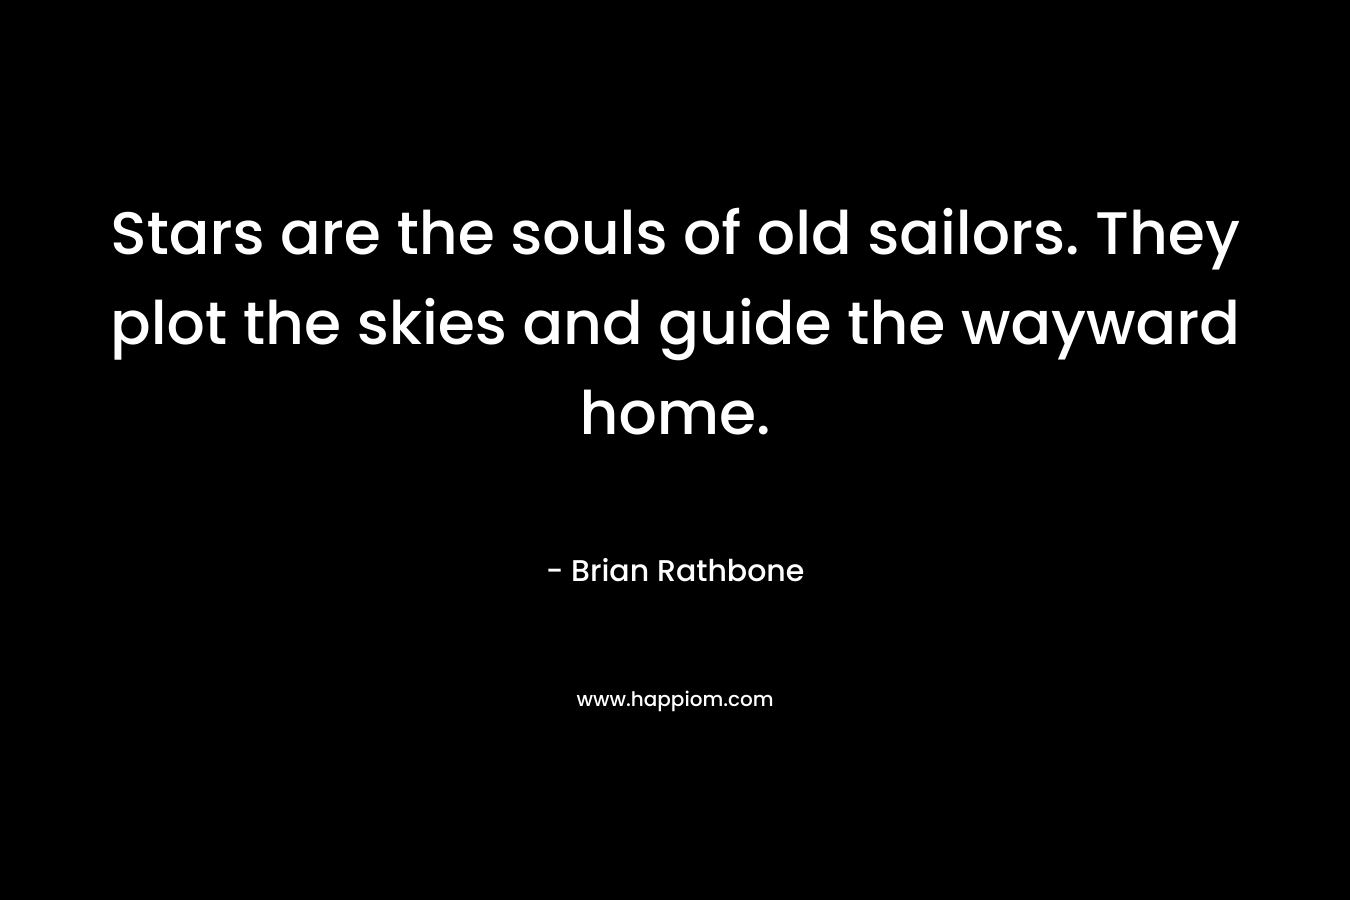 Stars are the souls of old sailors. They plot the skies and guide the wayward home. – Brian Rathbone